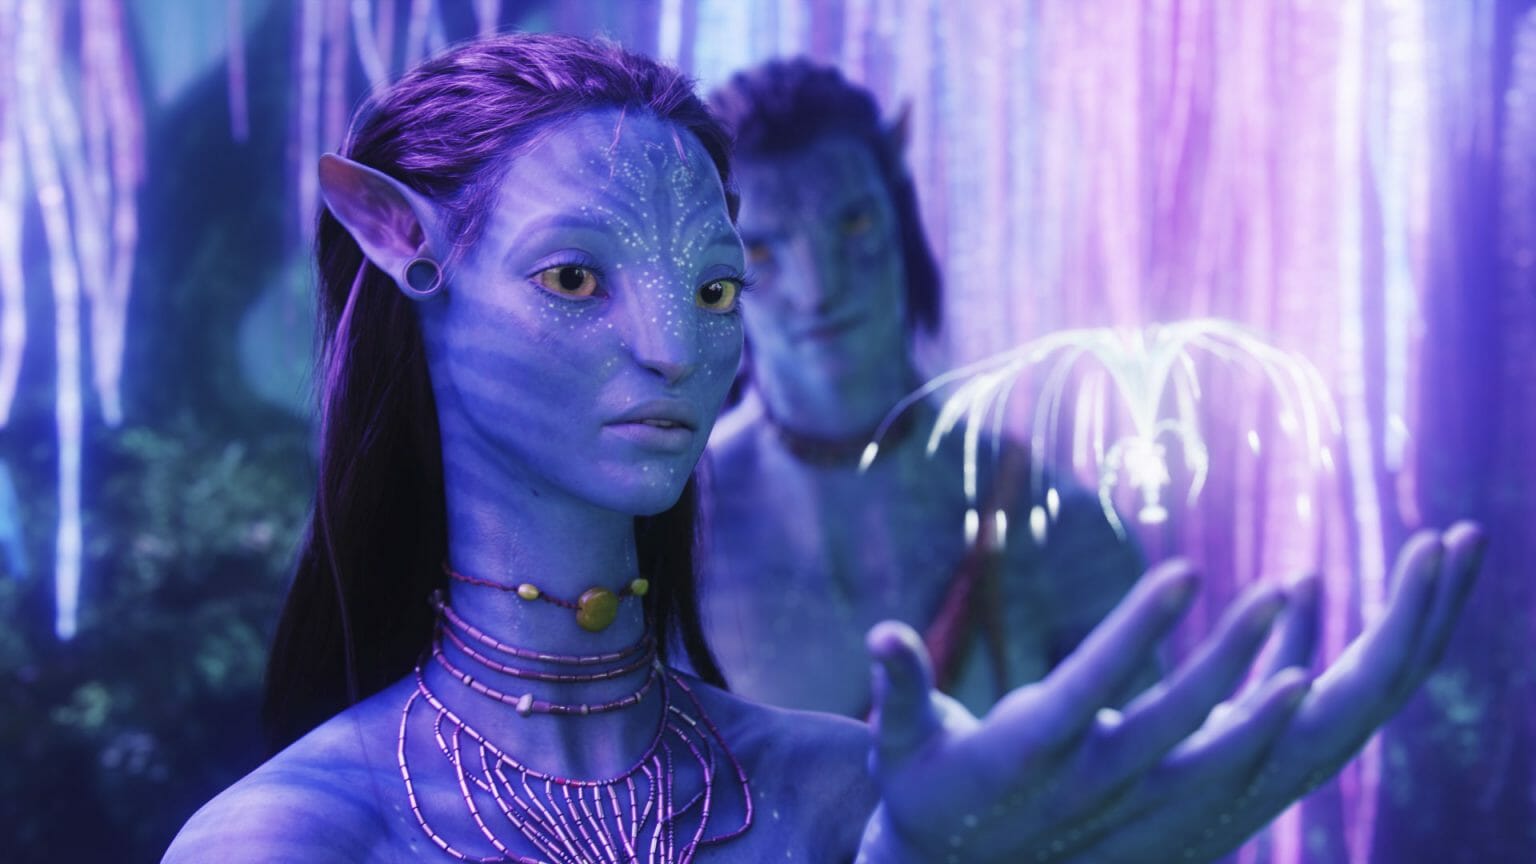 Neytiri played by Zoe Saldaña holds a woodspite Eywa seed from the tree of souls in AVATAR directed by James Cameron.